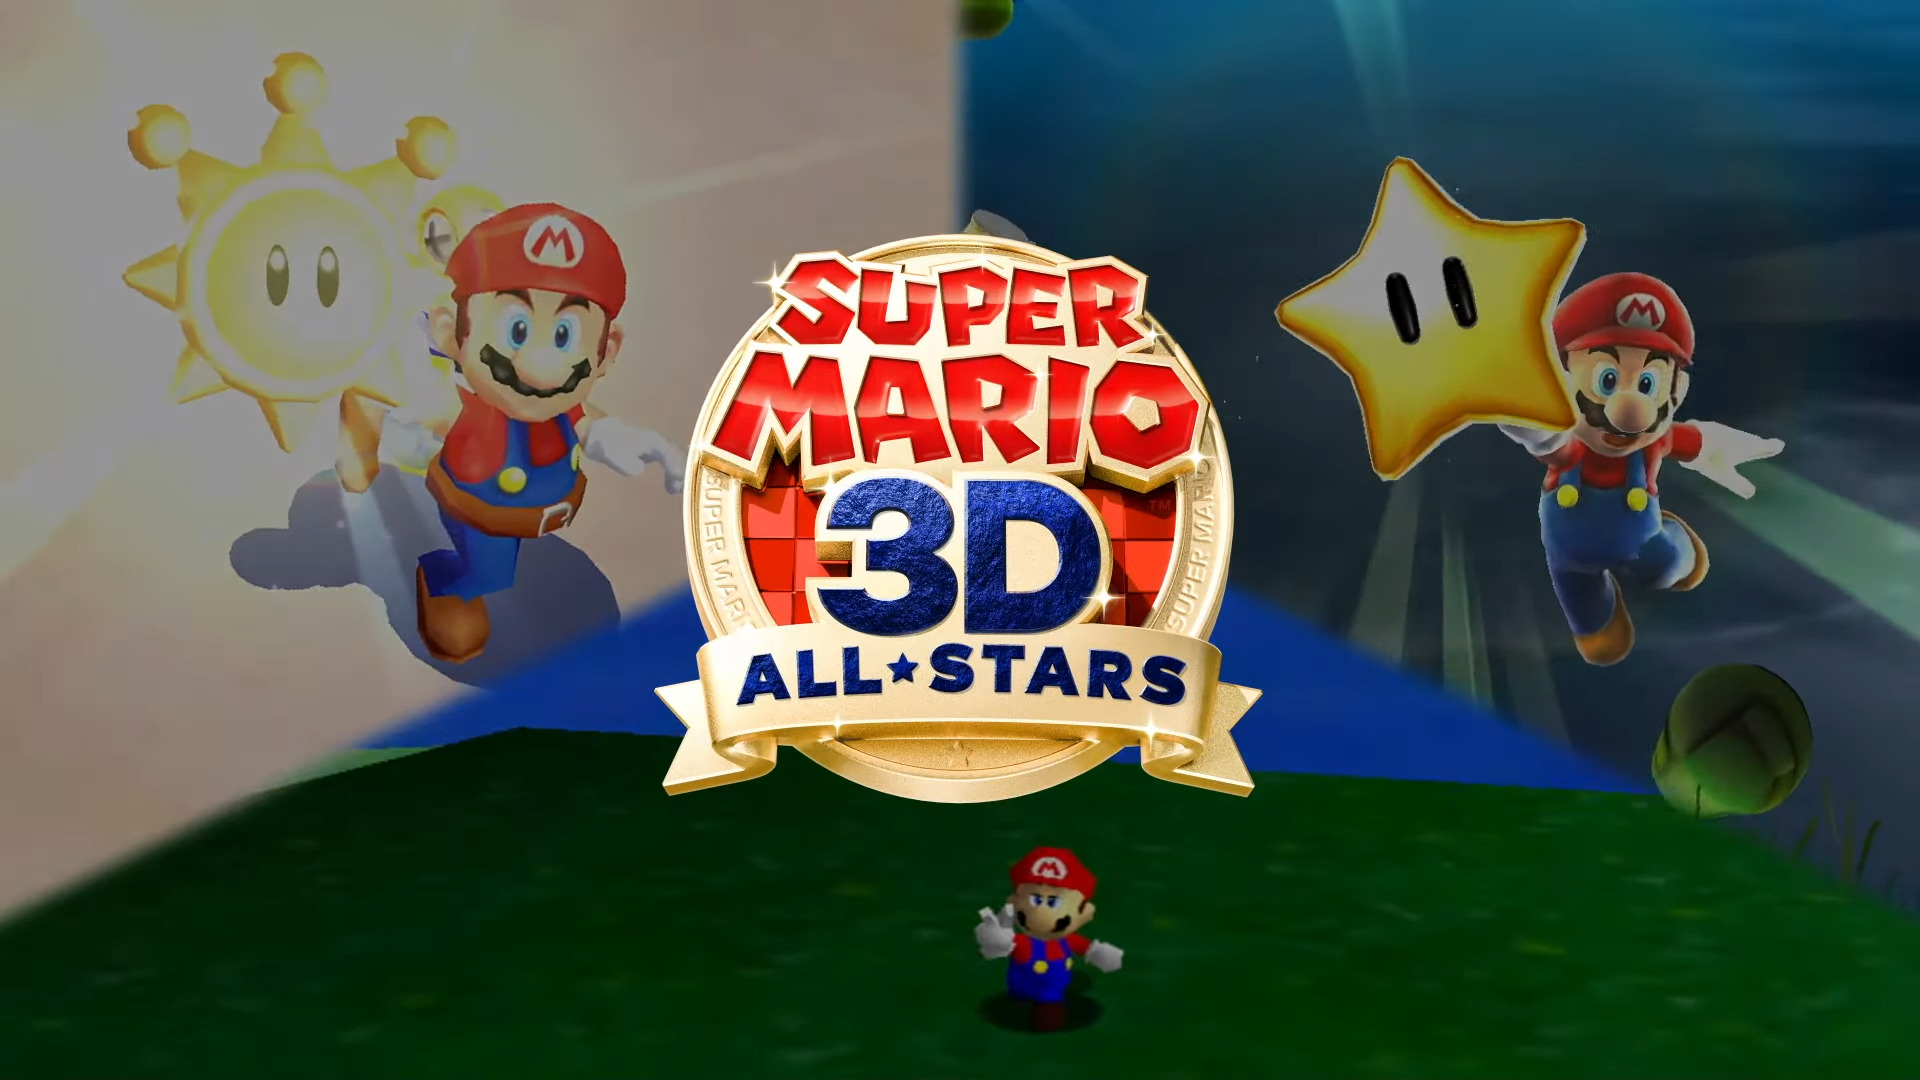 Nintendo Confirms That It Will Add Inverted Camera Controls For Super Mario 3D All-Stars